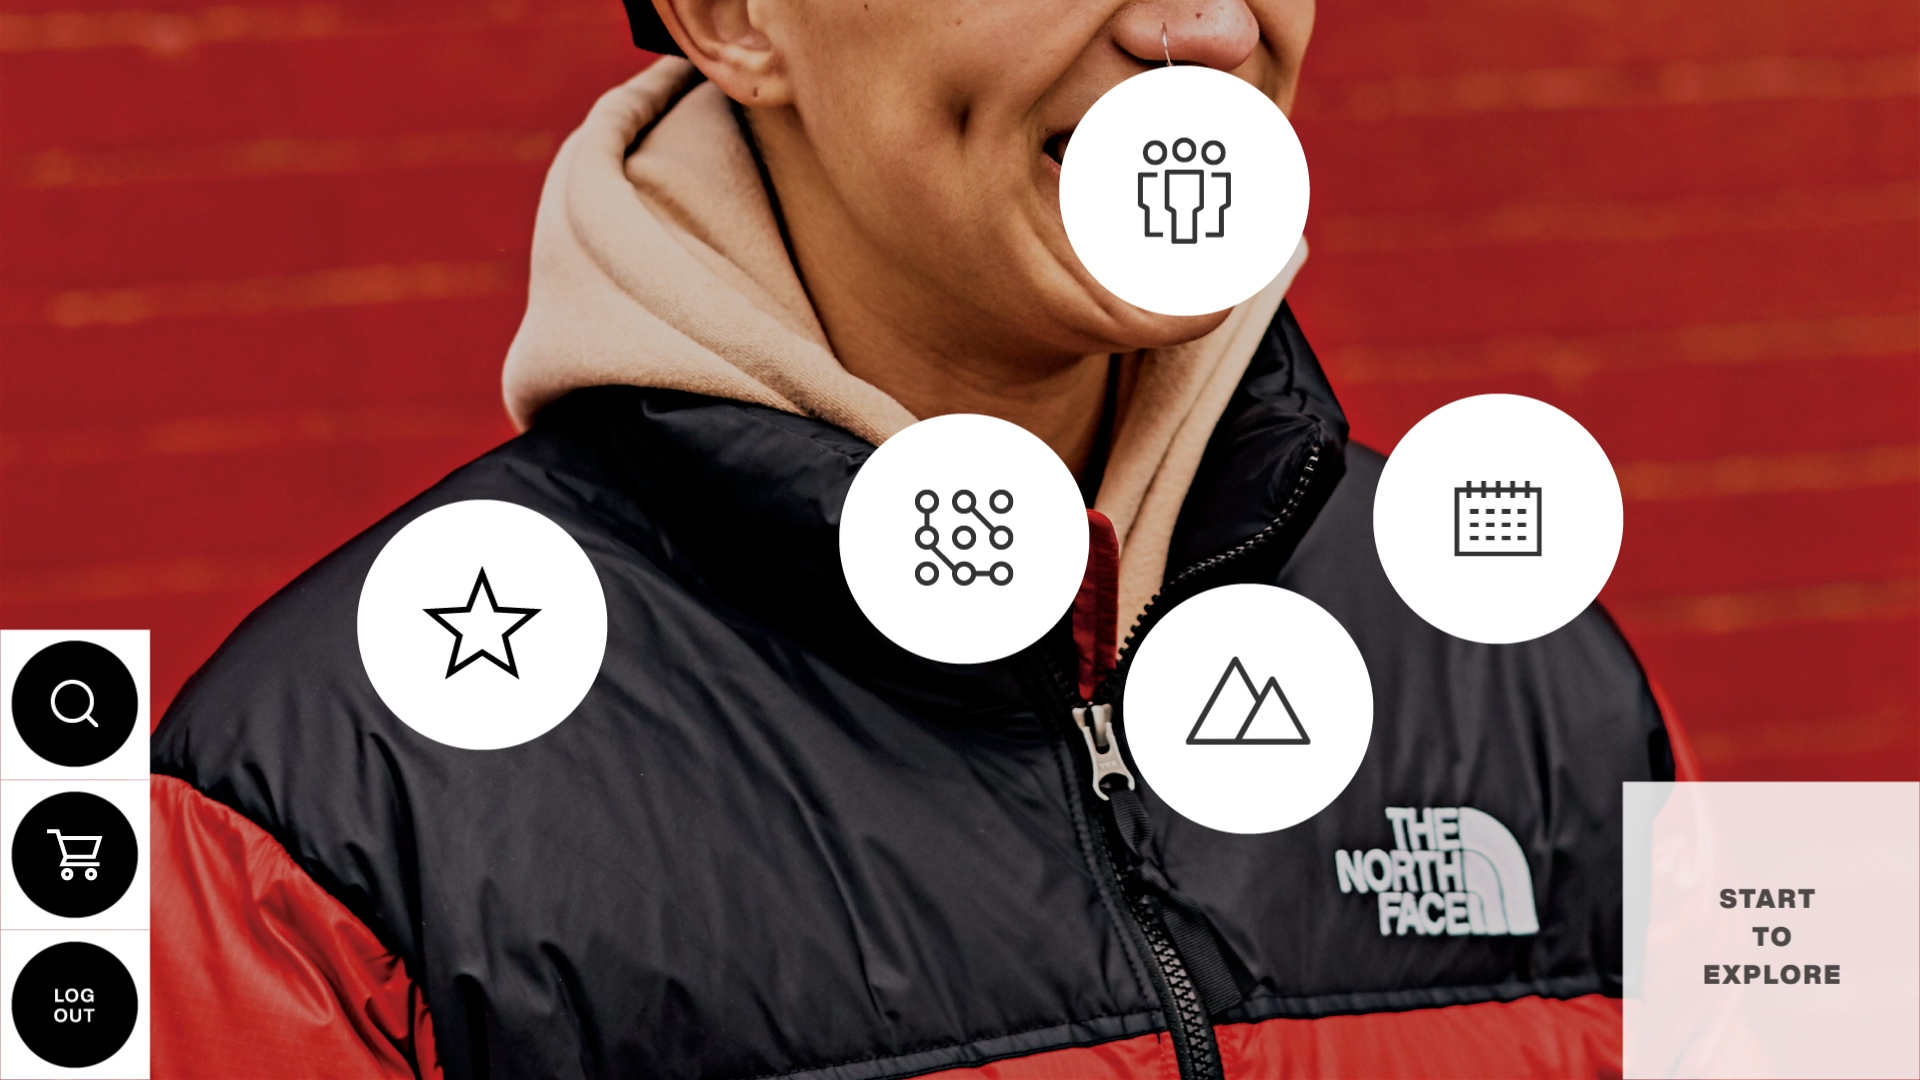 The North Face Display